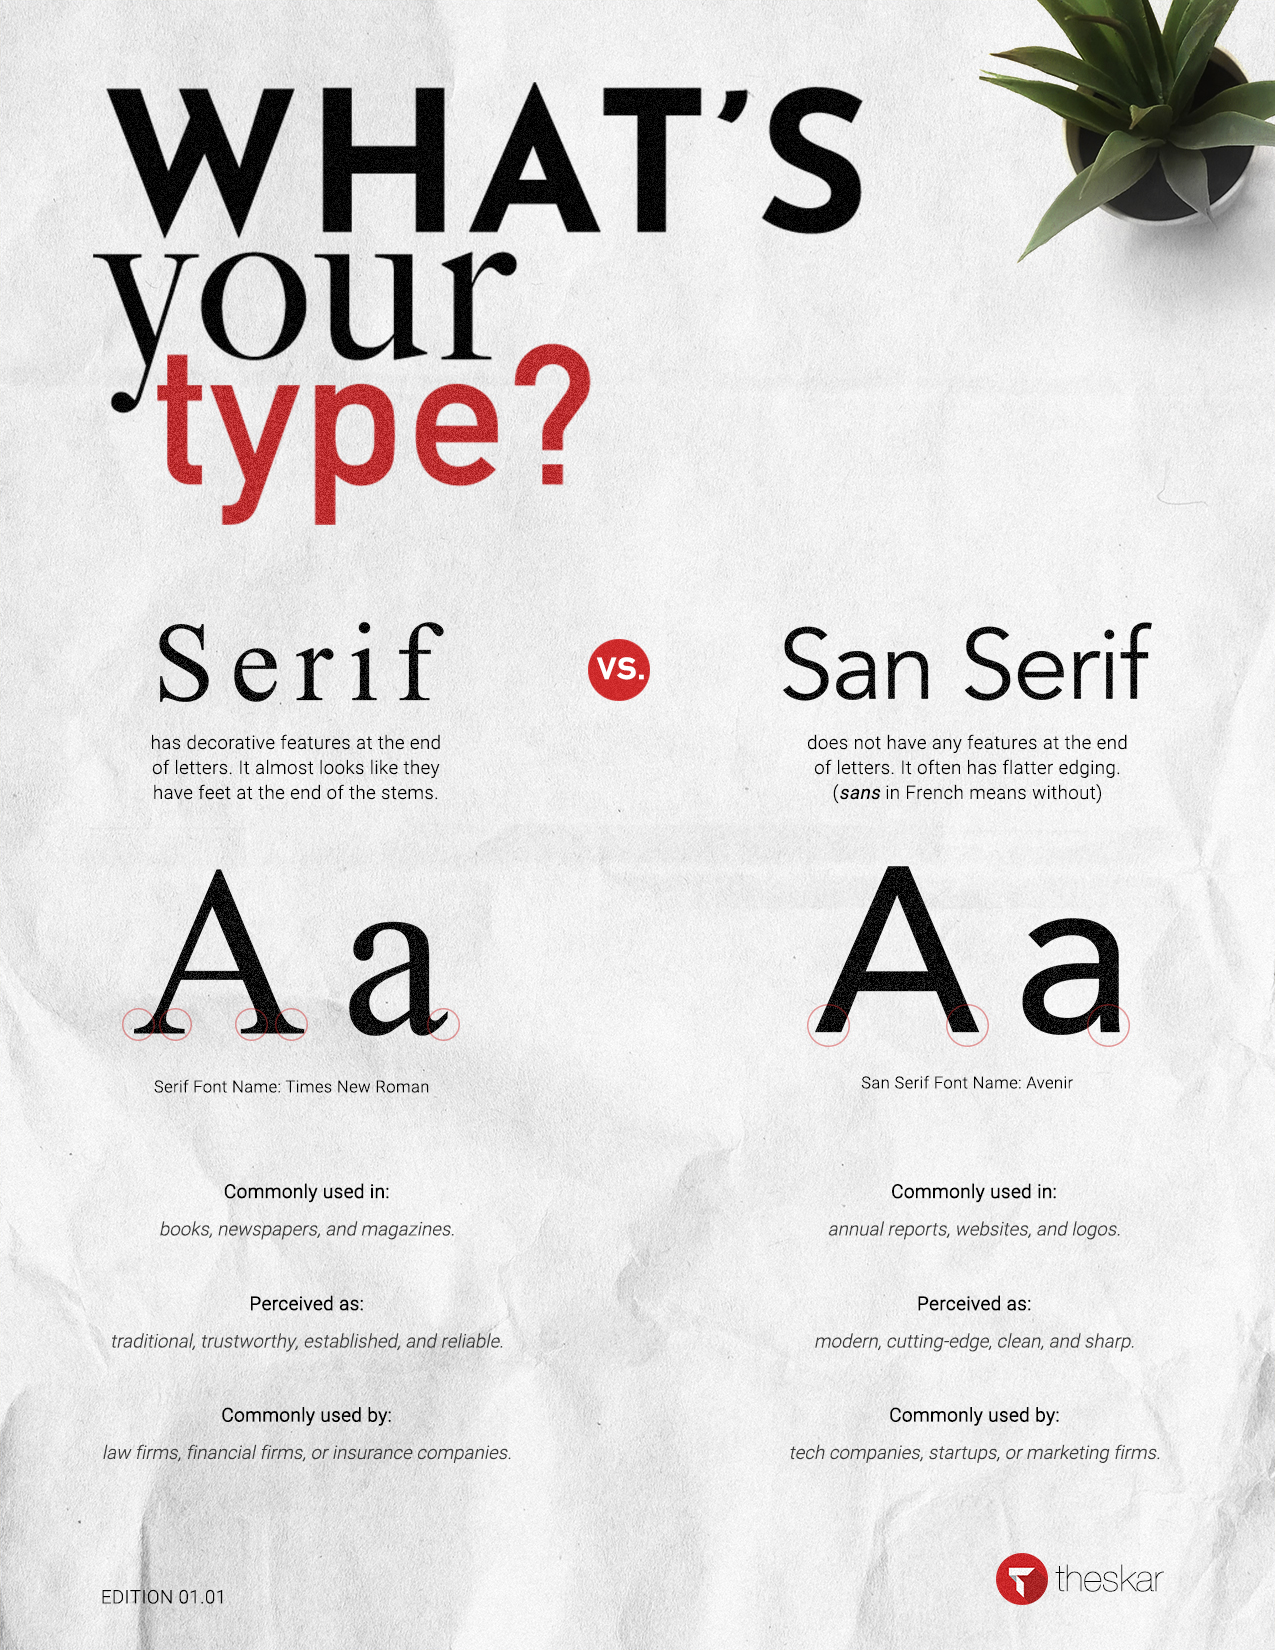 Theskar - What's your type poster